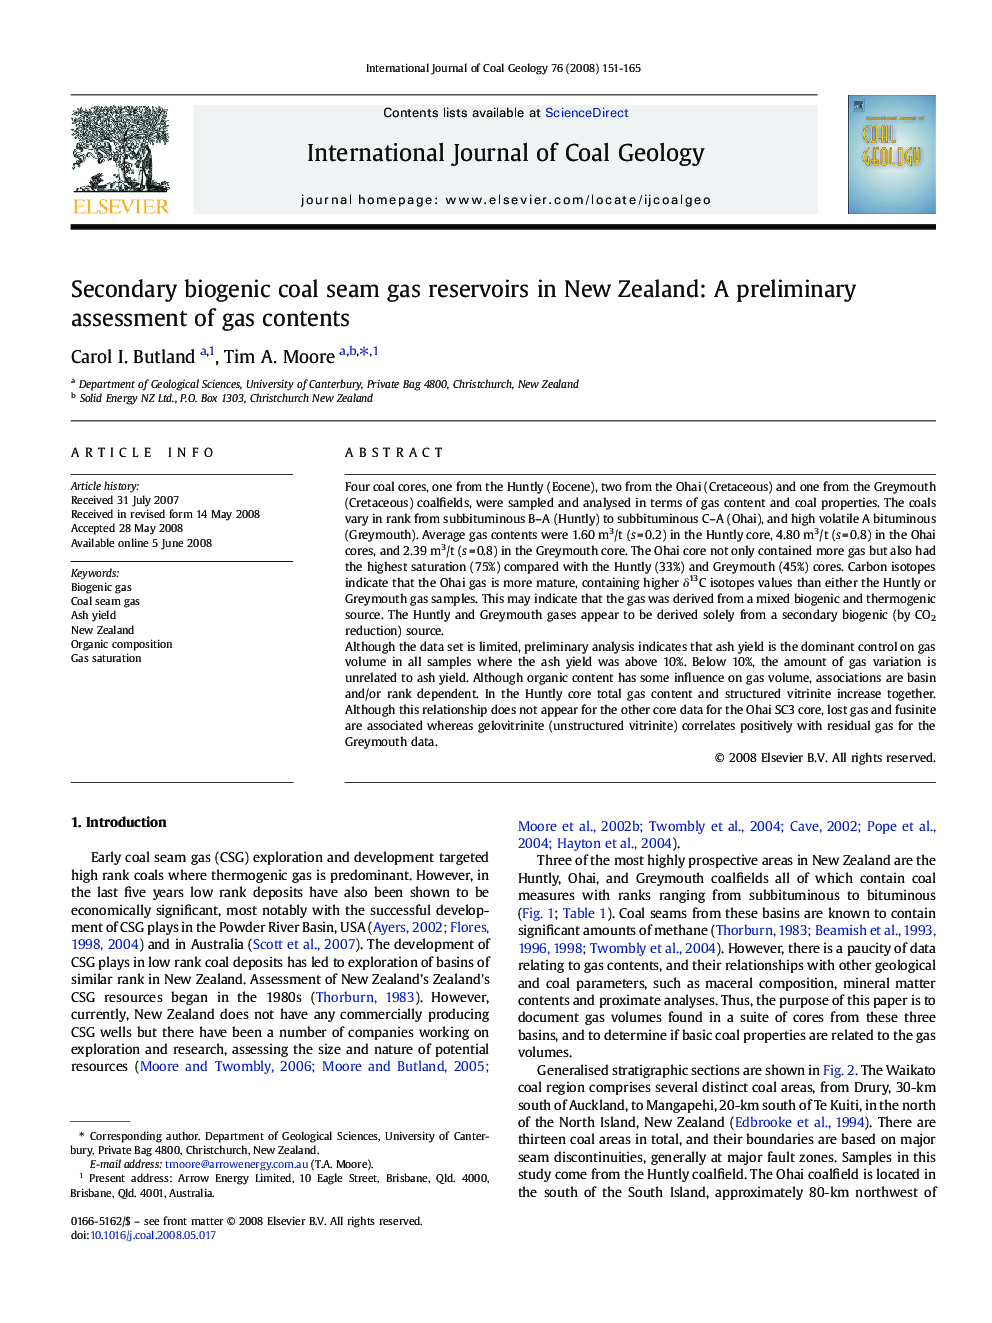 Secondary biogenic coal seam gas reservoirs in New Zealand: A preliminary assessment of gas contents